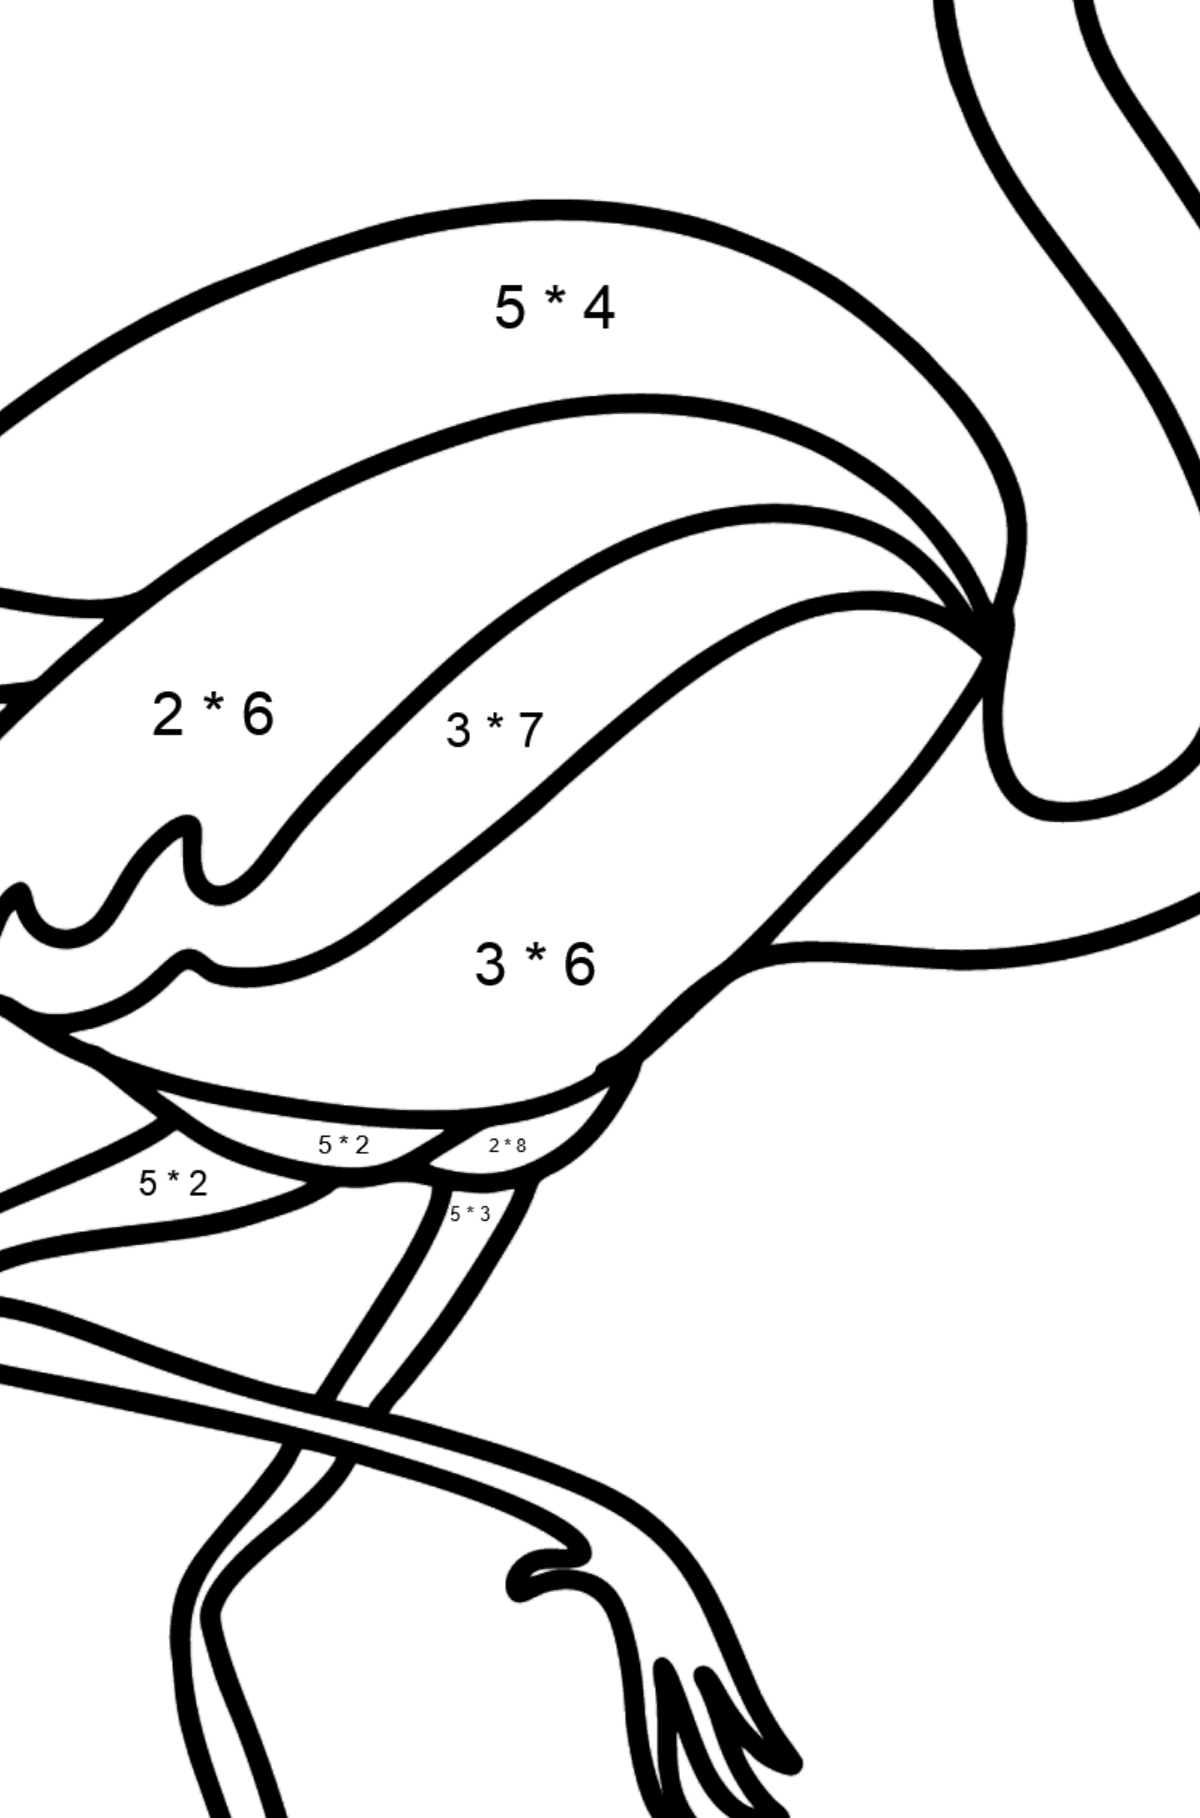 Flamingo coloring page - Math Coloring - Multiplication for Kids